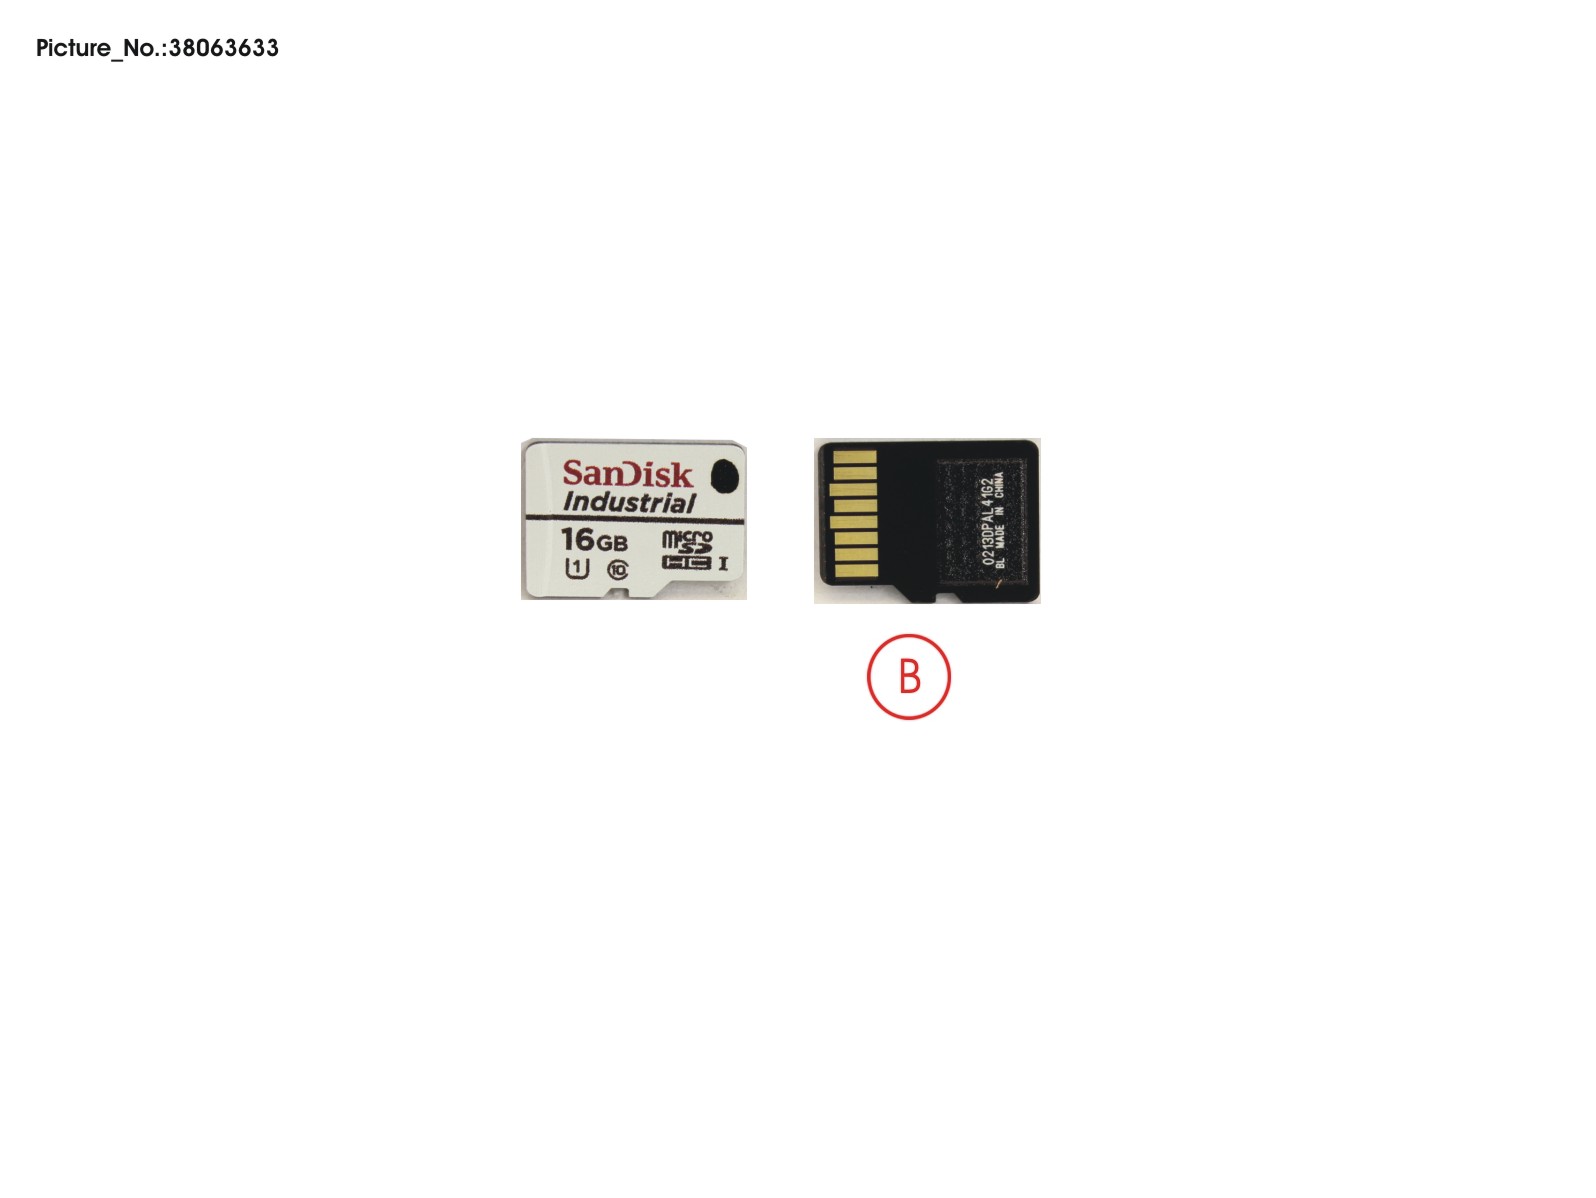 SD CARD SPARE PARTS